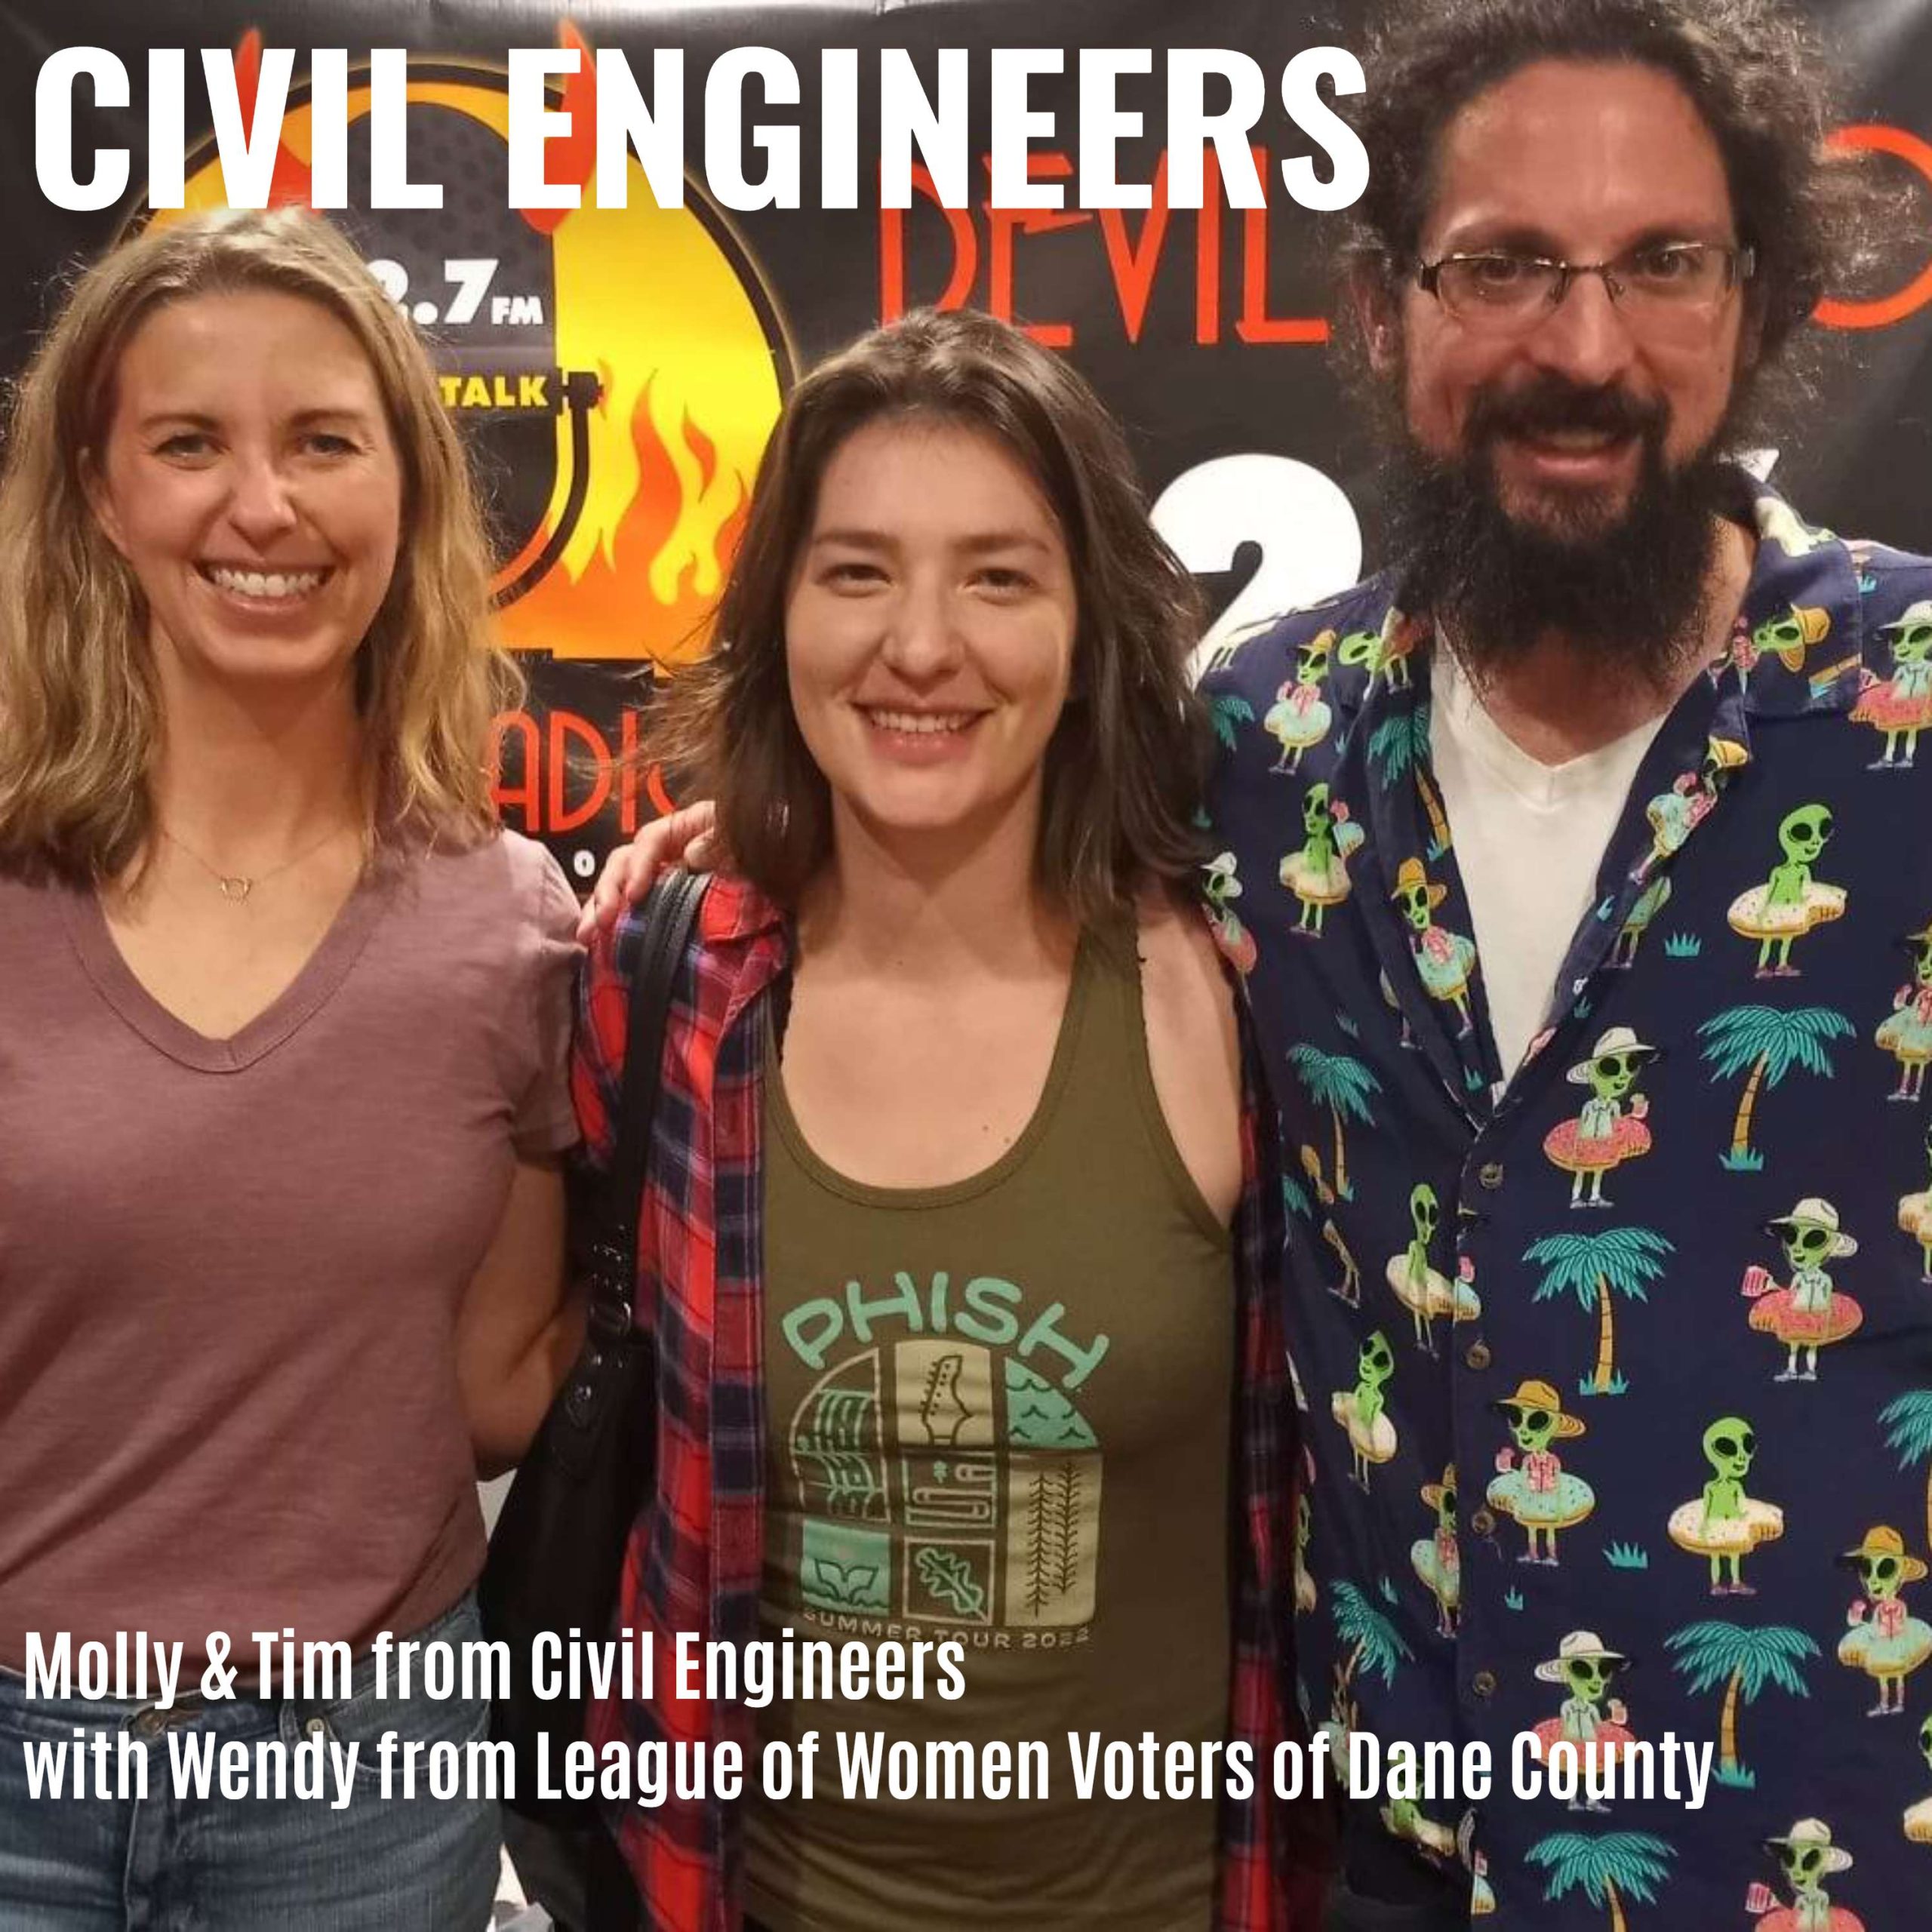 Wendy (League of Women Voters of Dane County), Molly Fish, Tim Lopez (Civil Engineers)